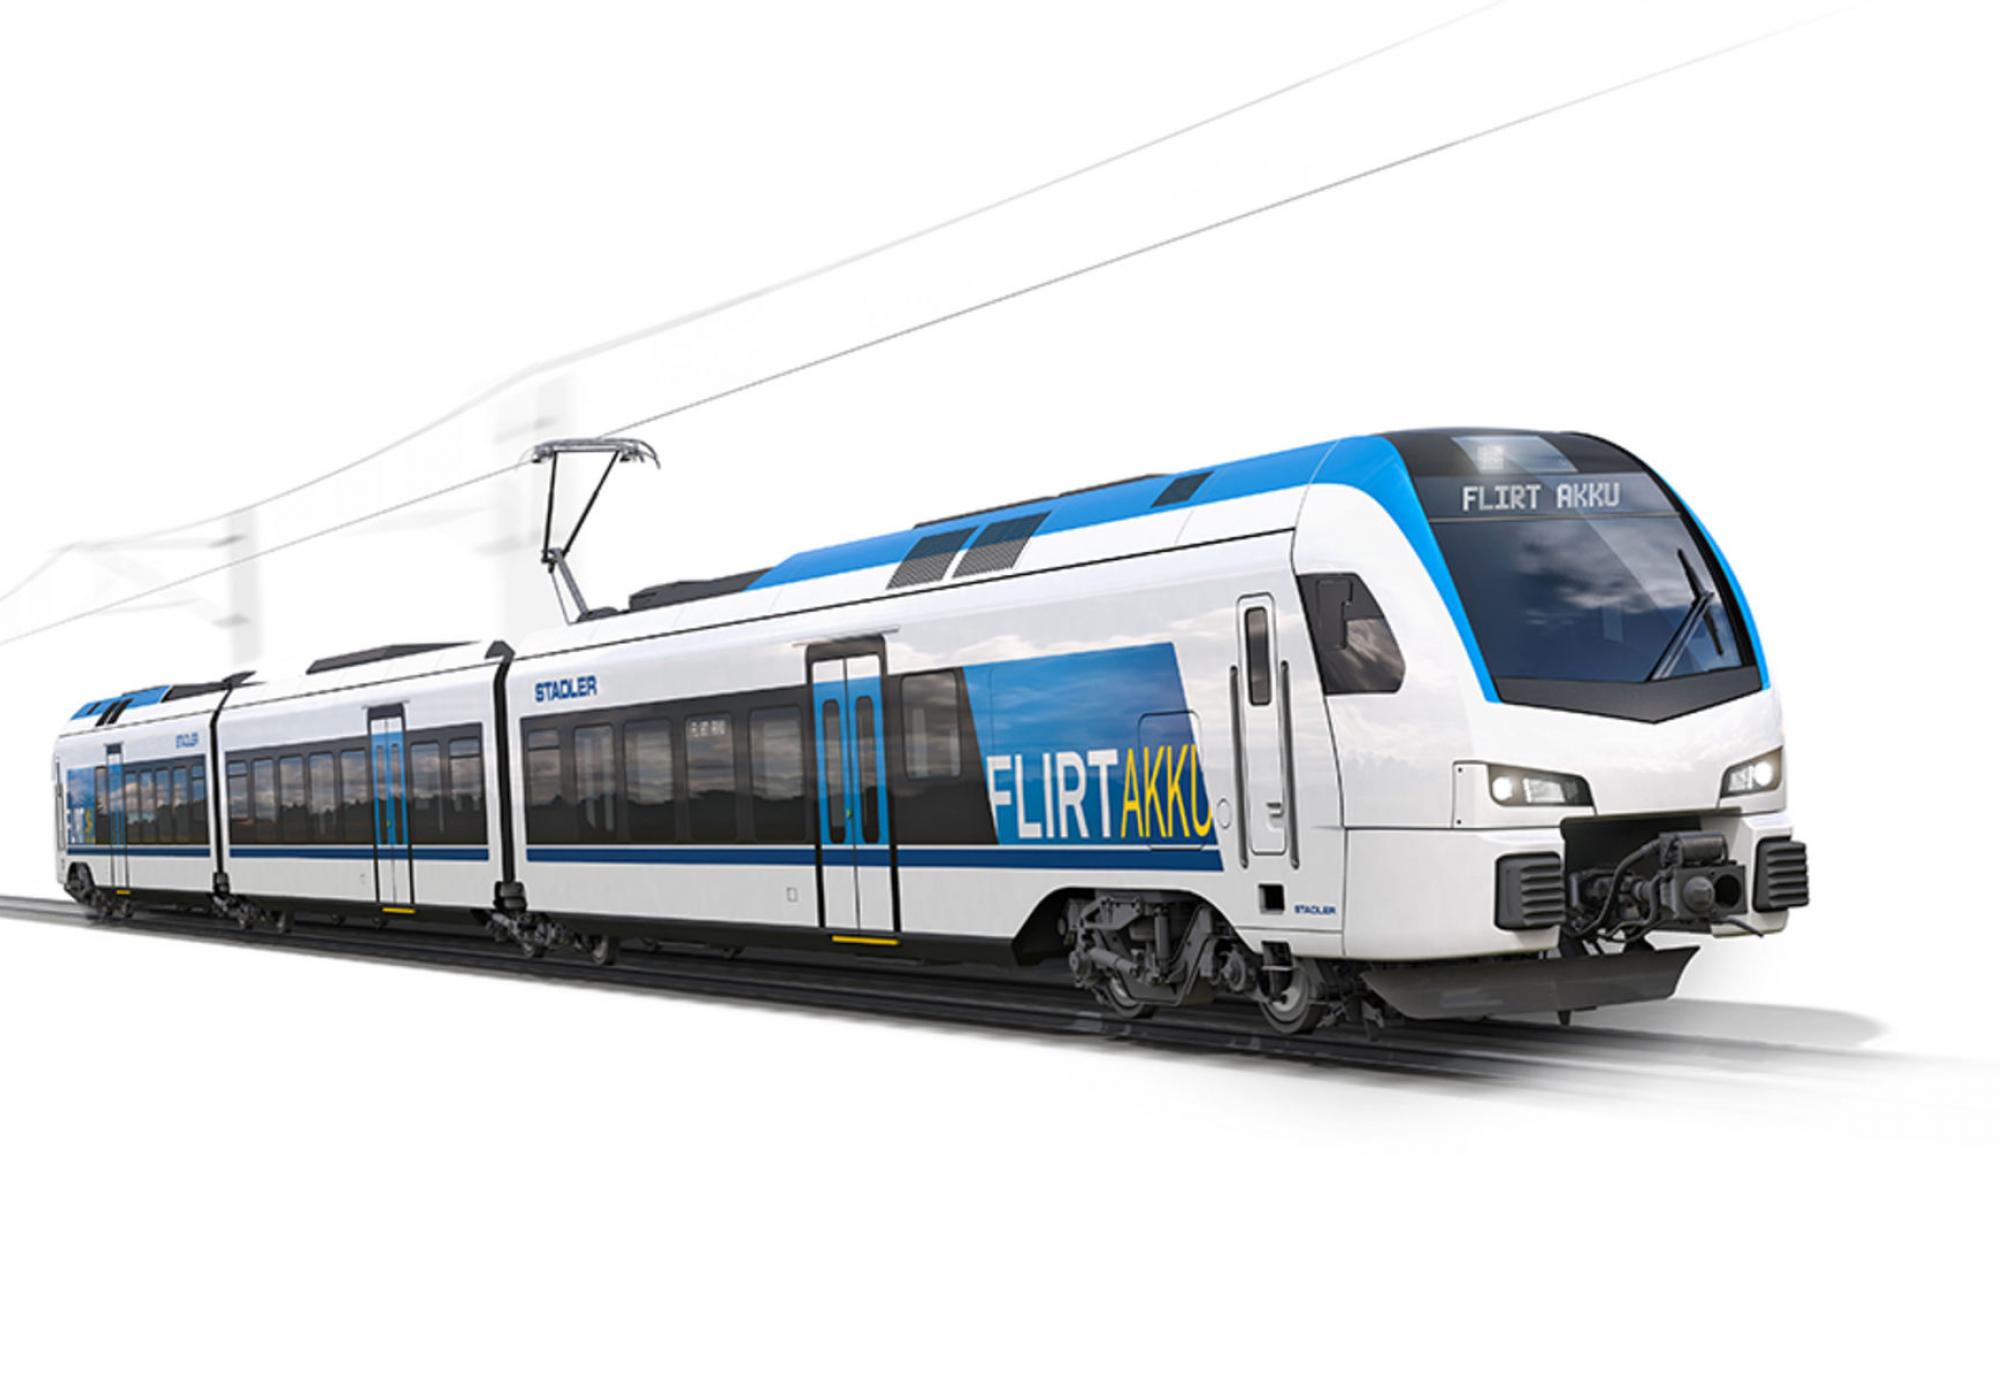 Austrian rail network turns to green rail options with new train order from Stadler